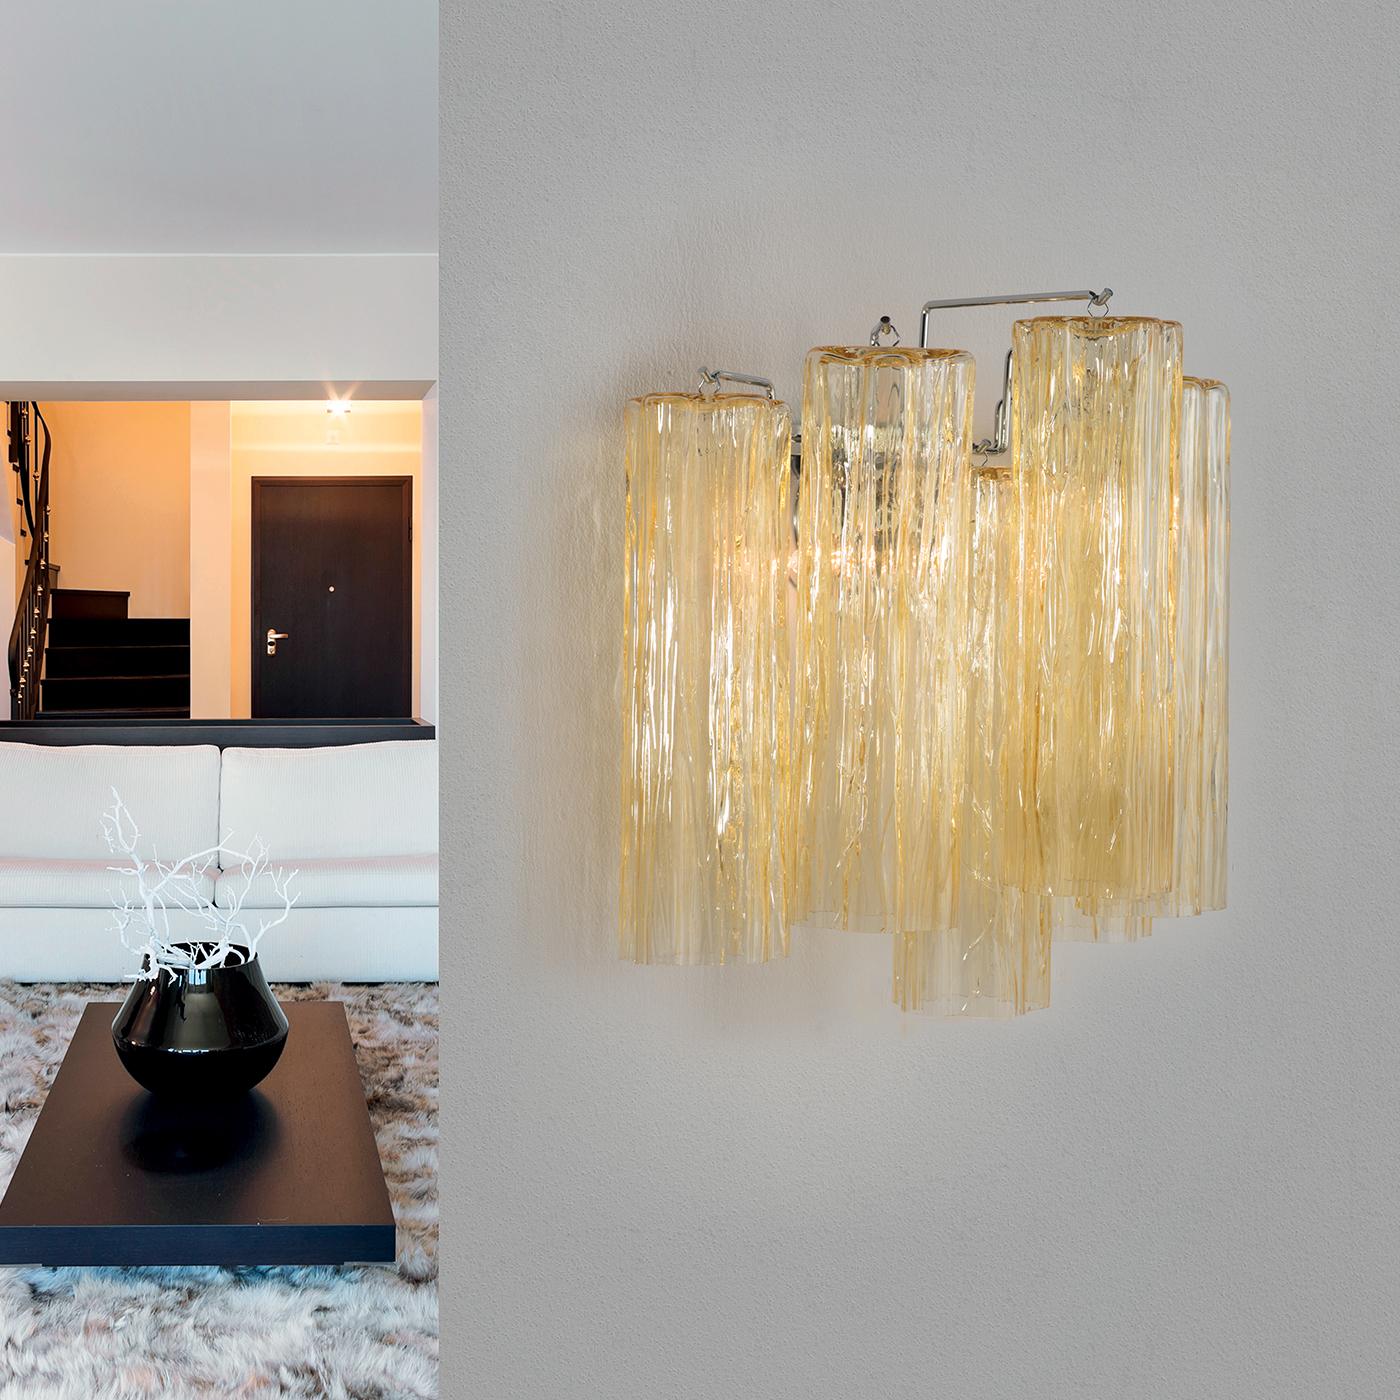 Crafted in clear hammered glass with the main structure in a chrome or 24-karat gold finish, this beautiful lighting fixture features an amazing and luxurious design of hollow tubes in varying lengths cascading down. This incredible Wall Lamp offers